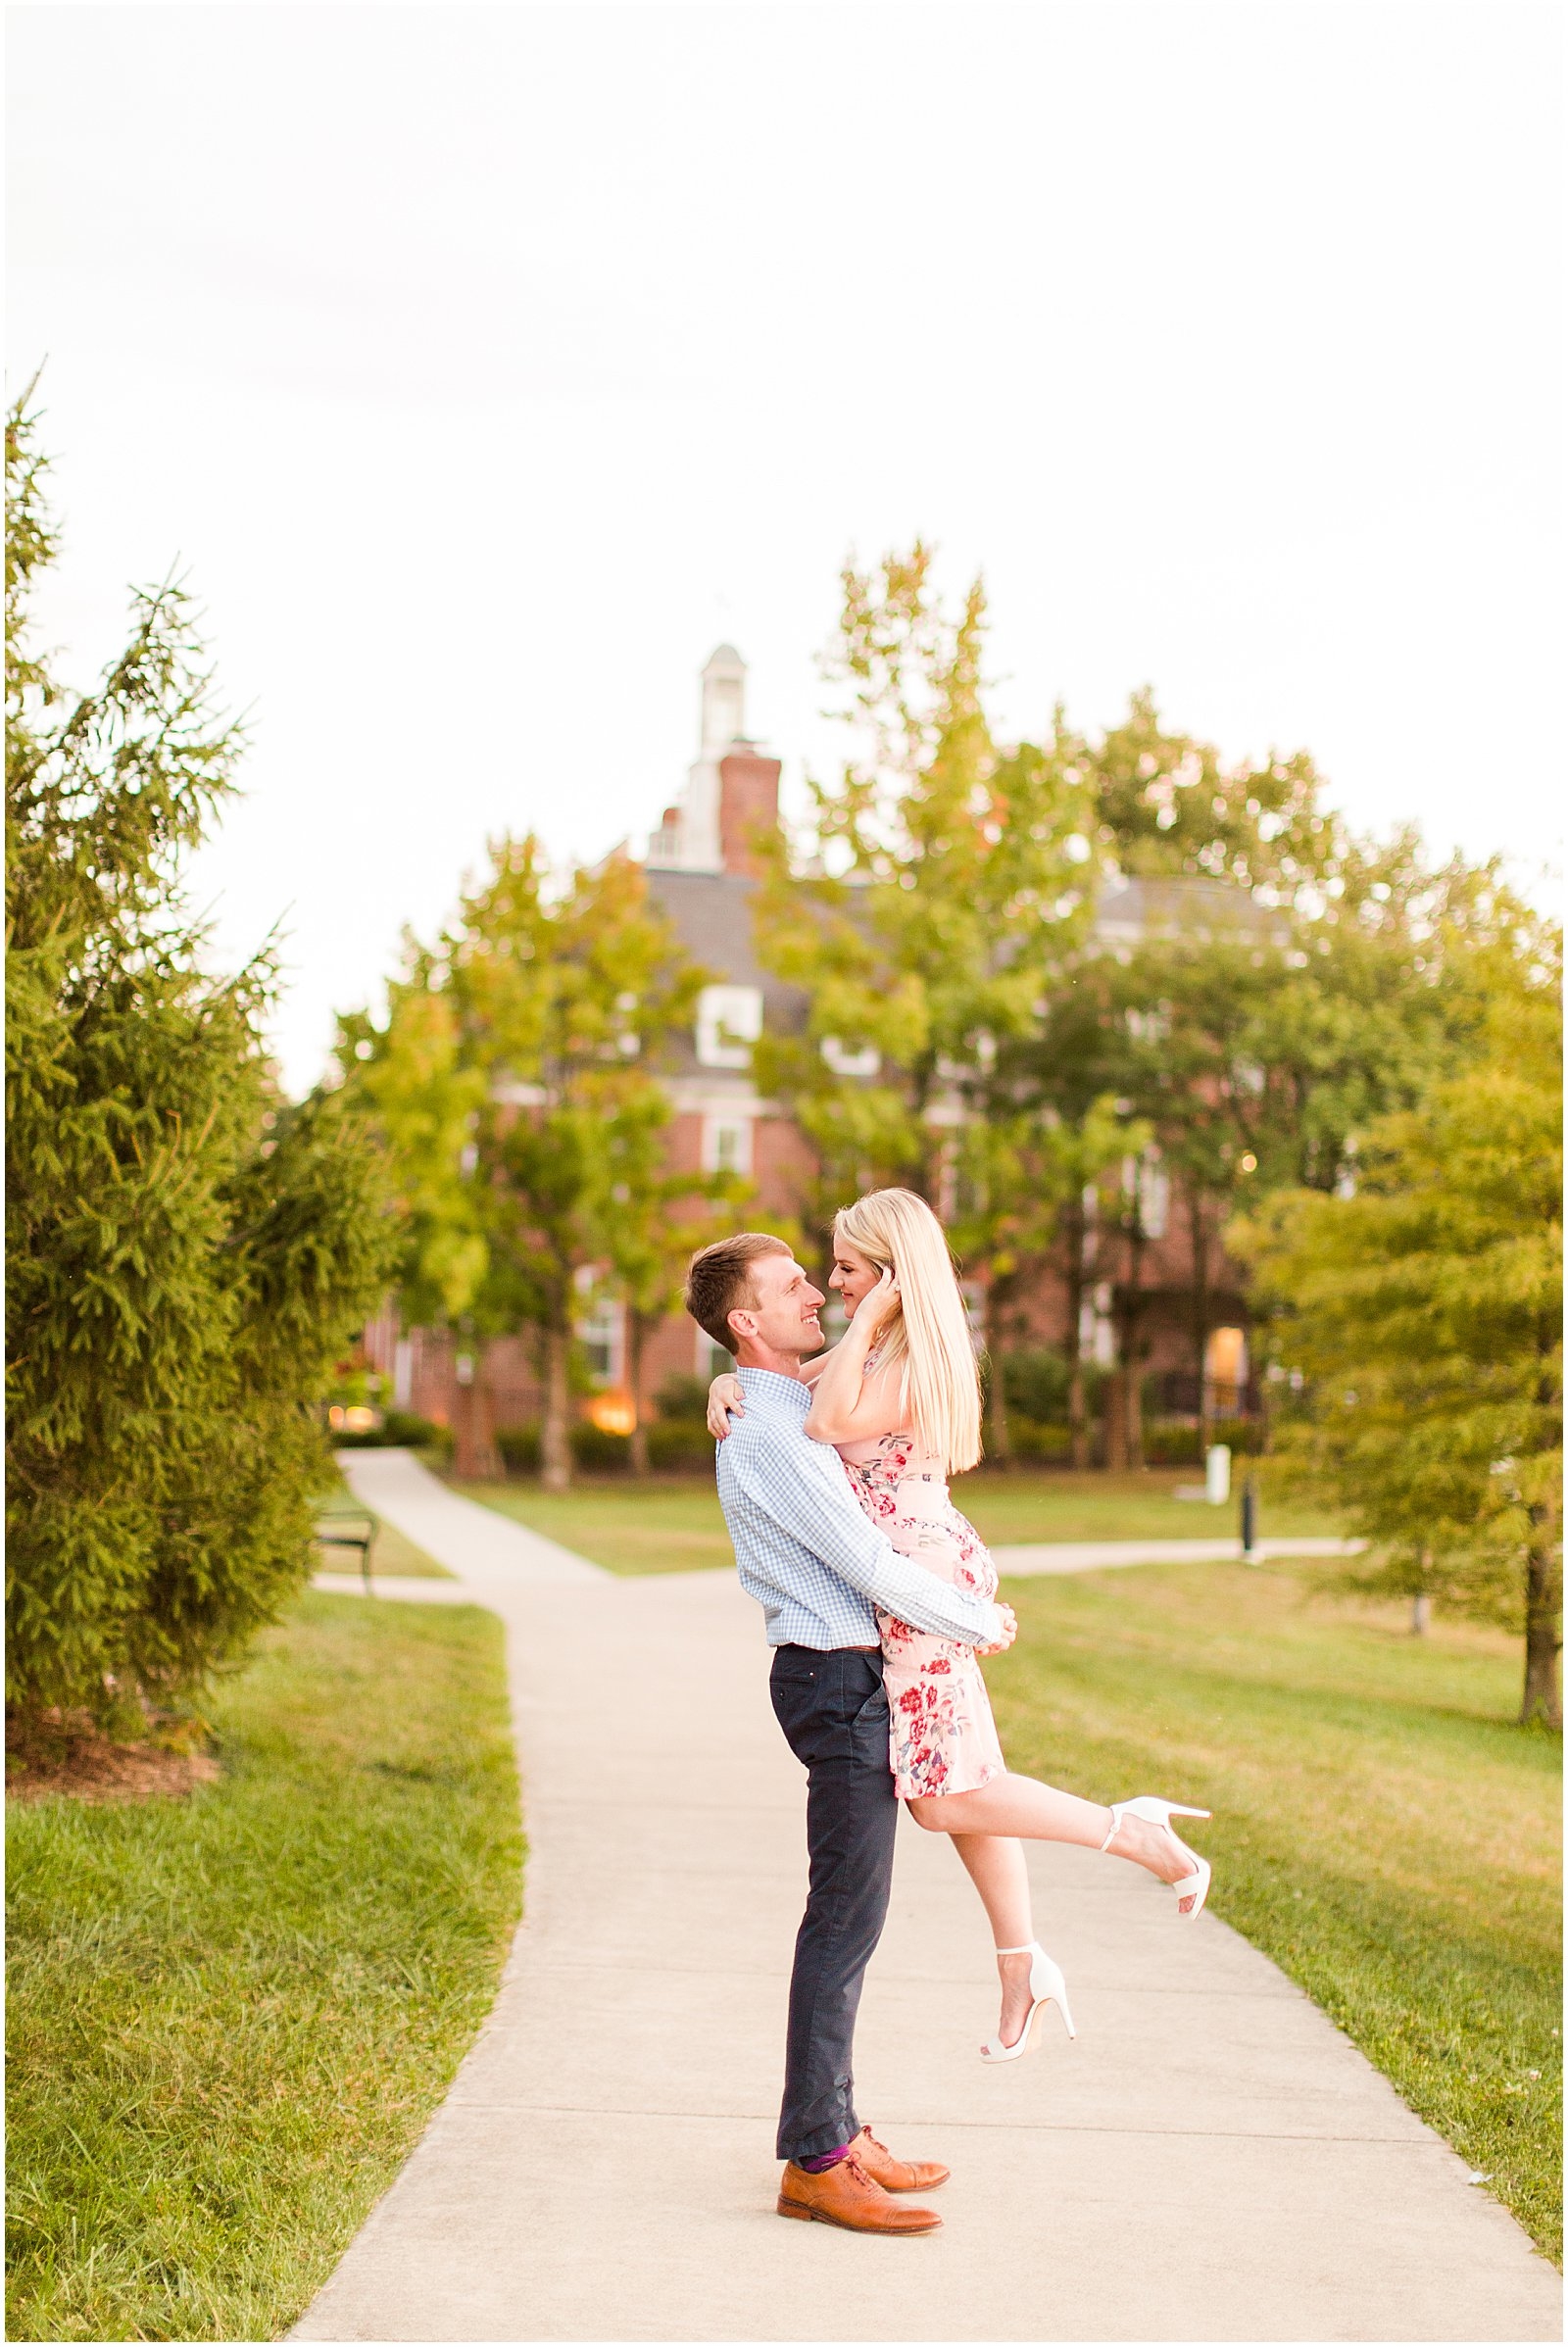 A Cute and Cuddly Engagement Session in Carmel, IN | Abbi and Josh0055.jpg